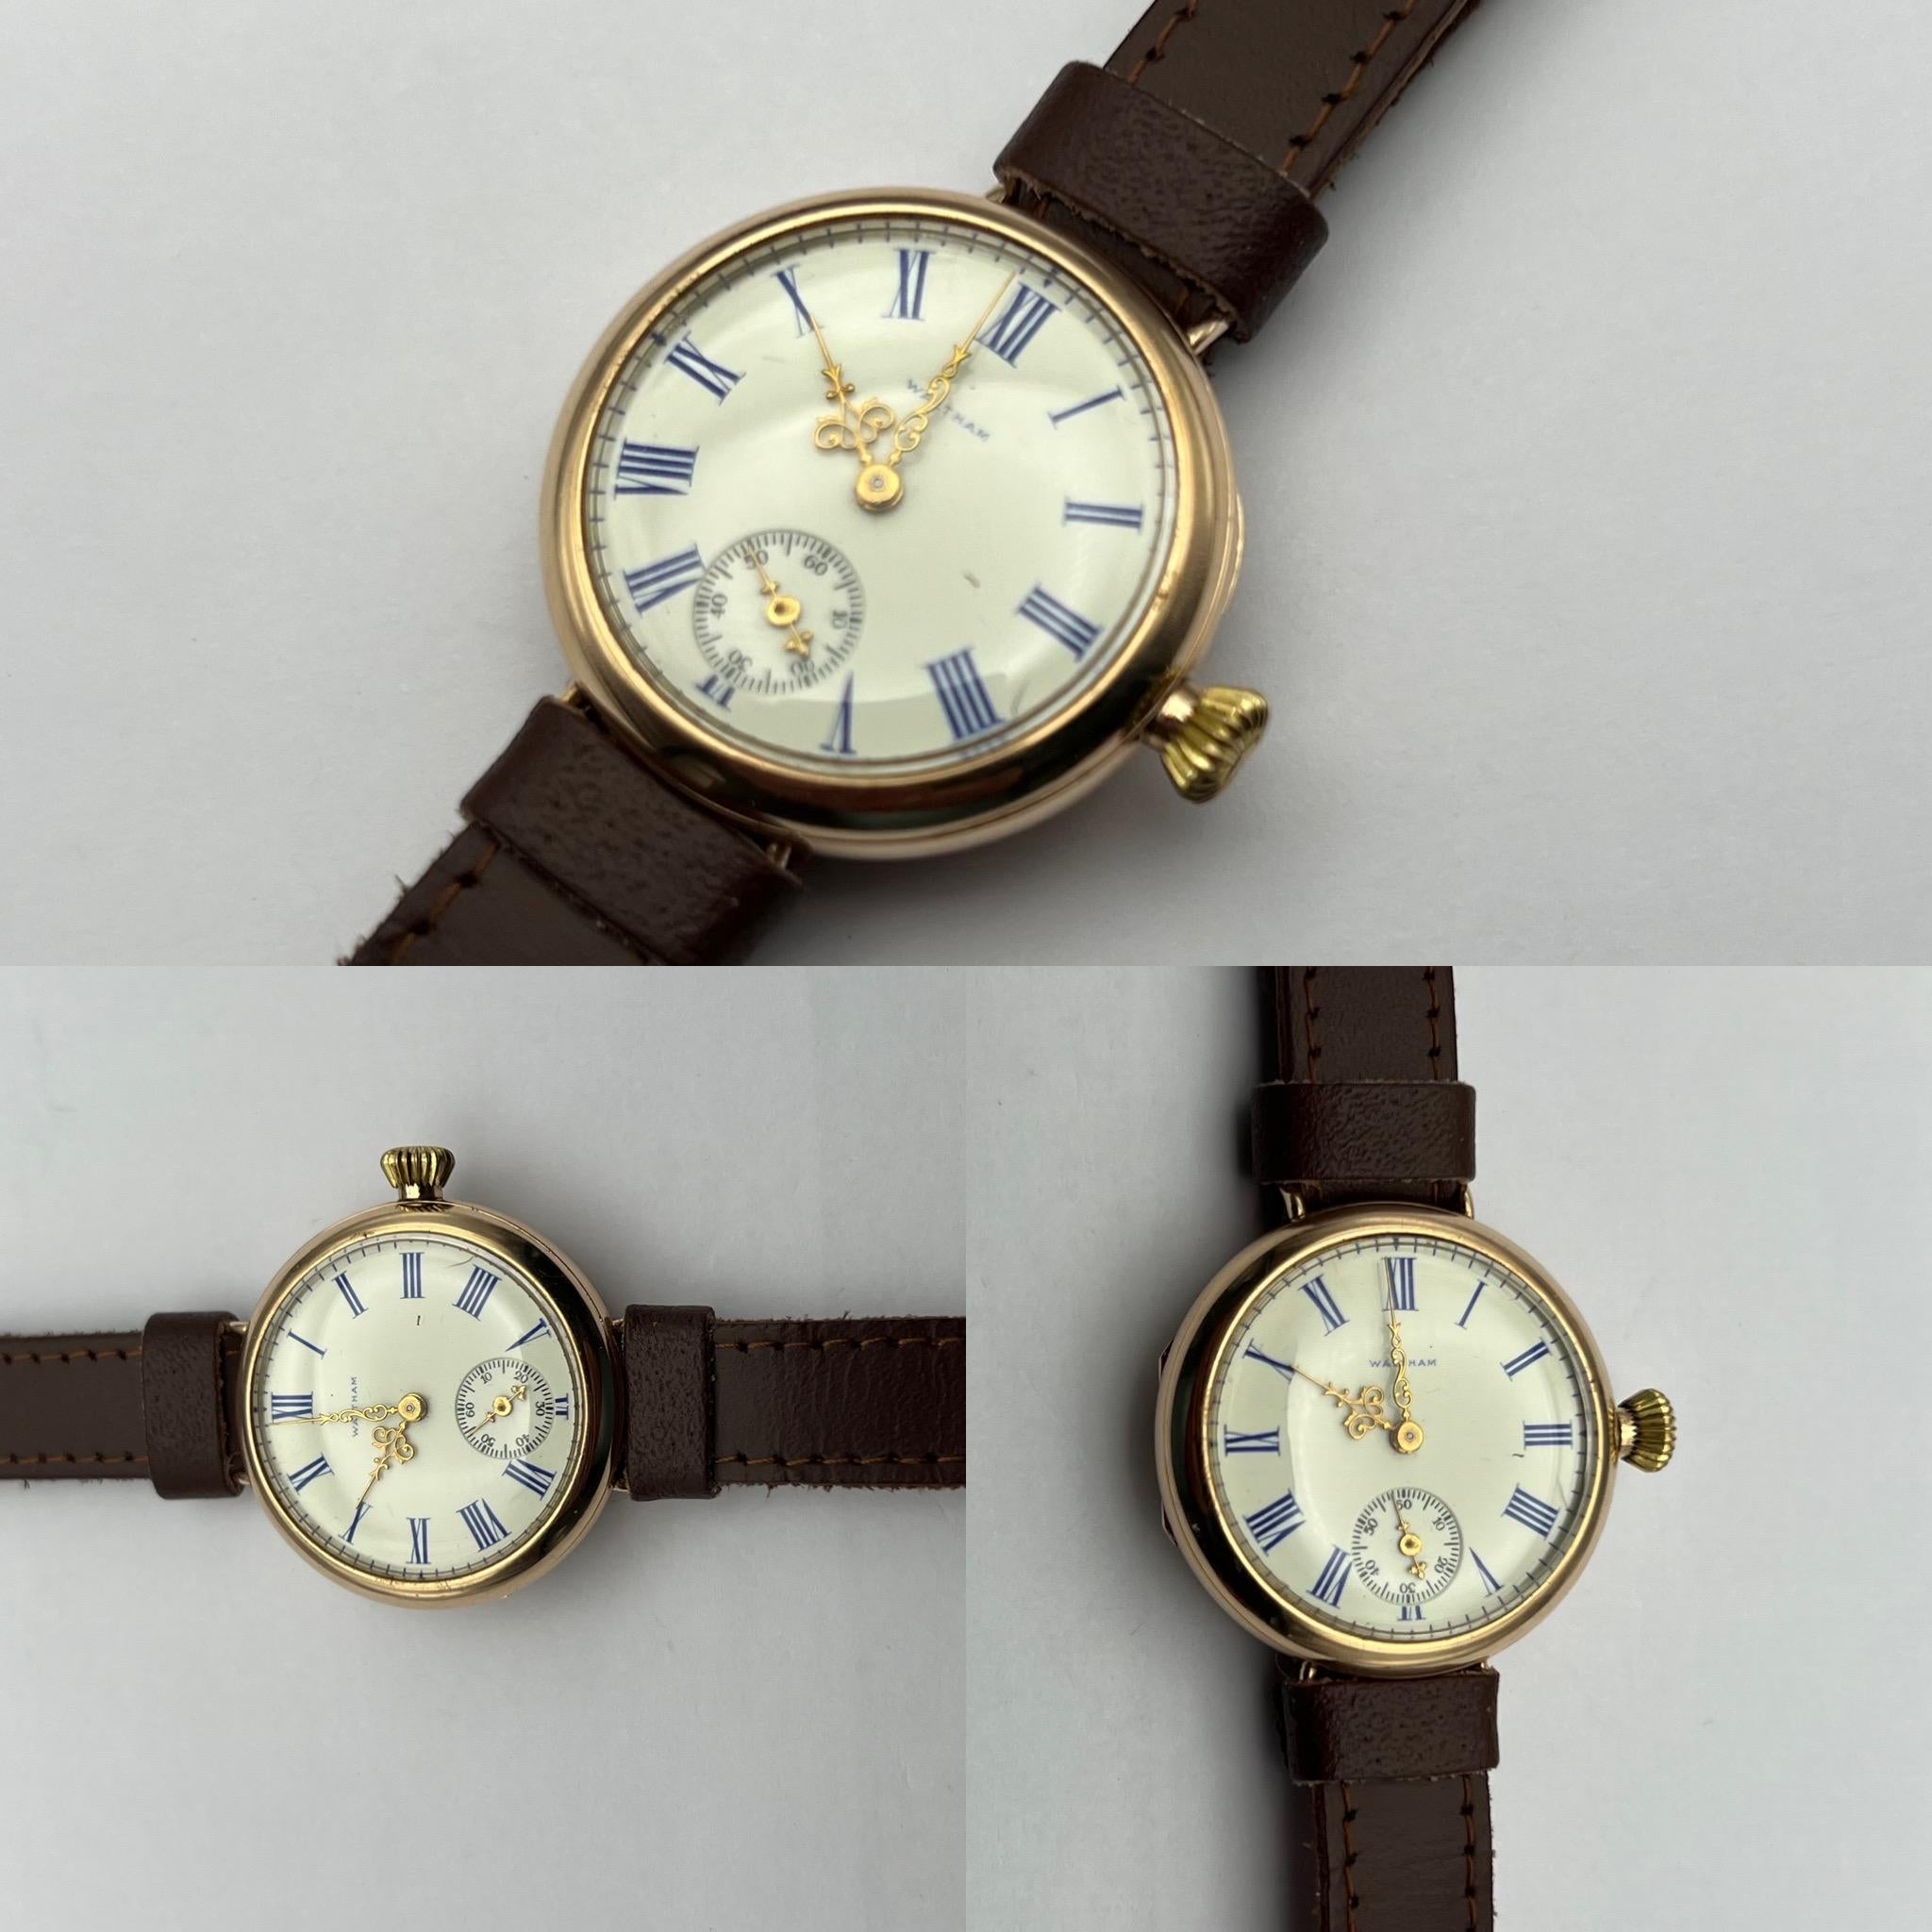 What an incredible offering. How about an English Waltham Trench Watch with a rare 